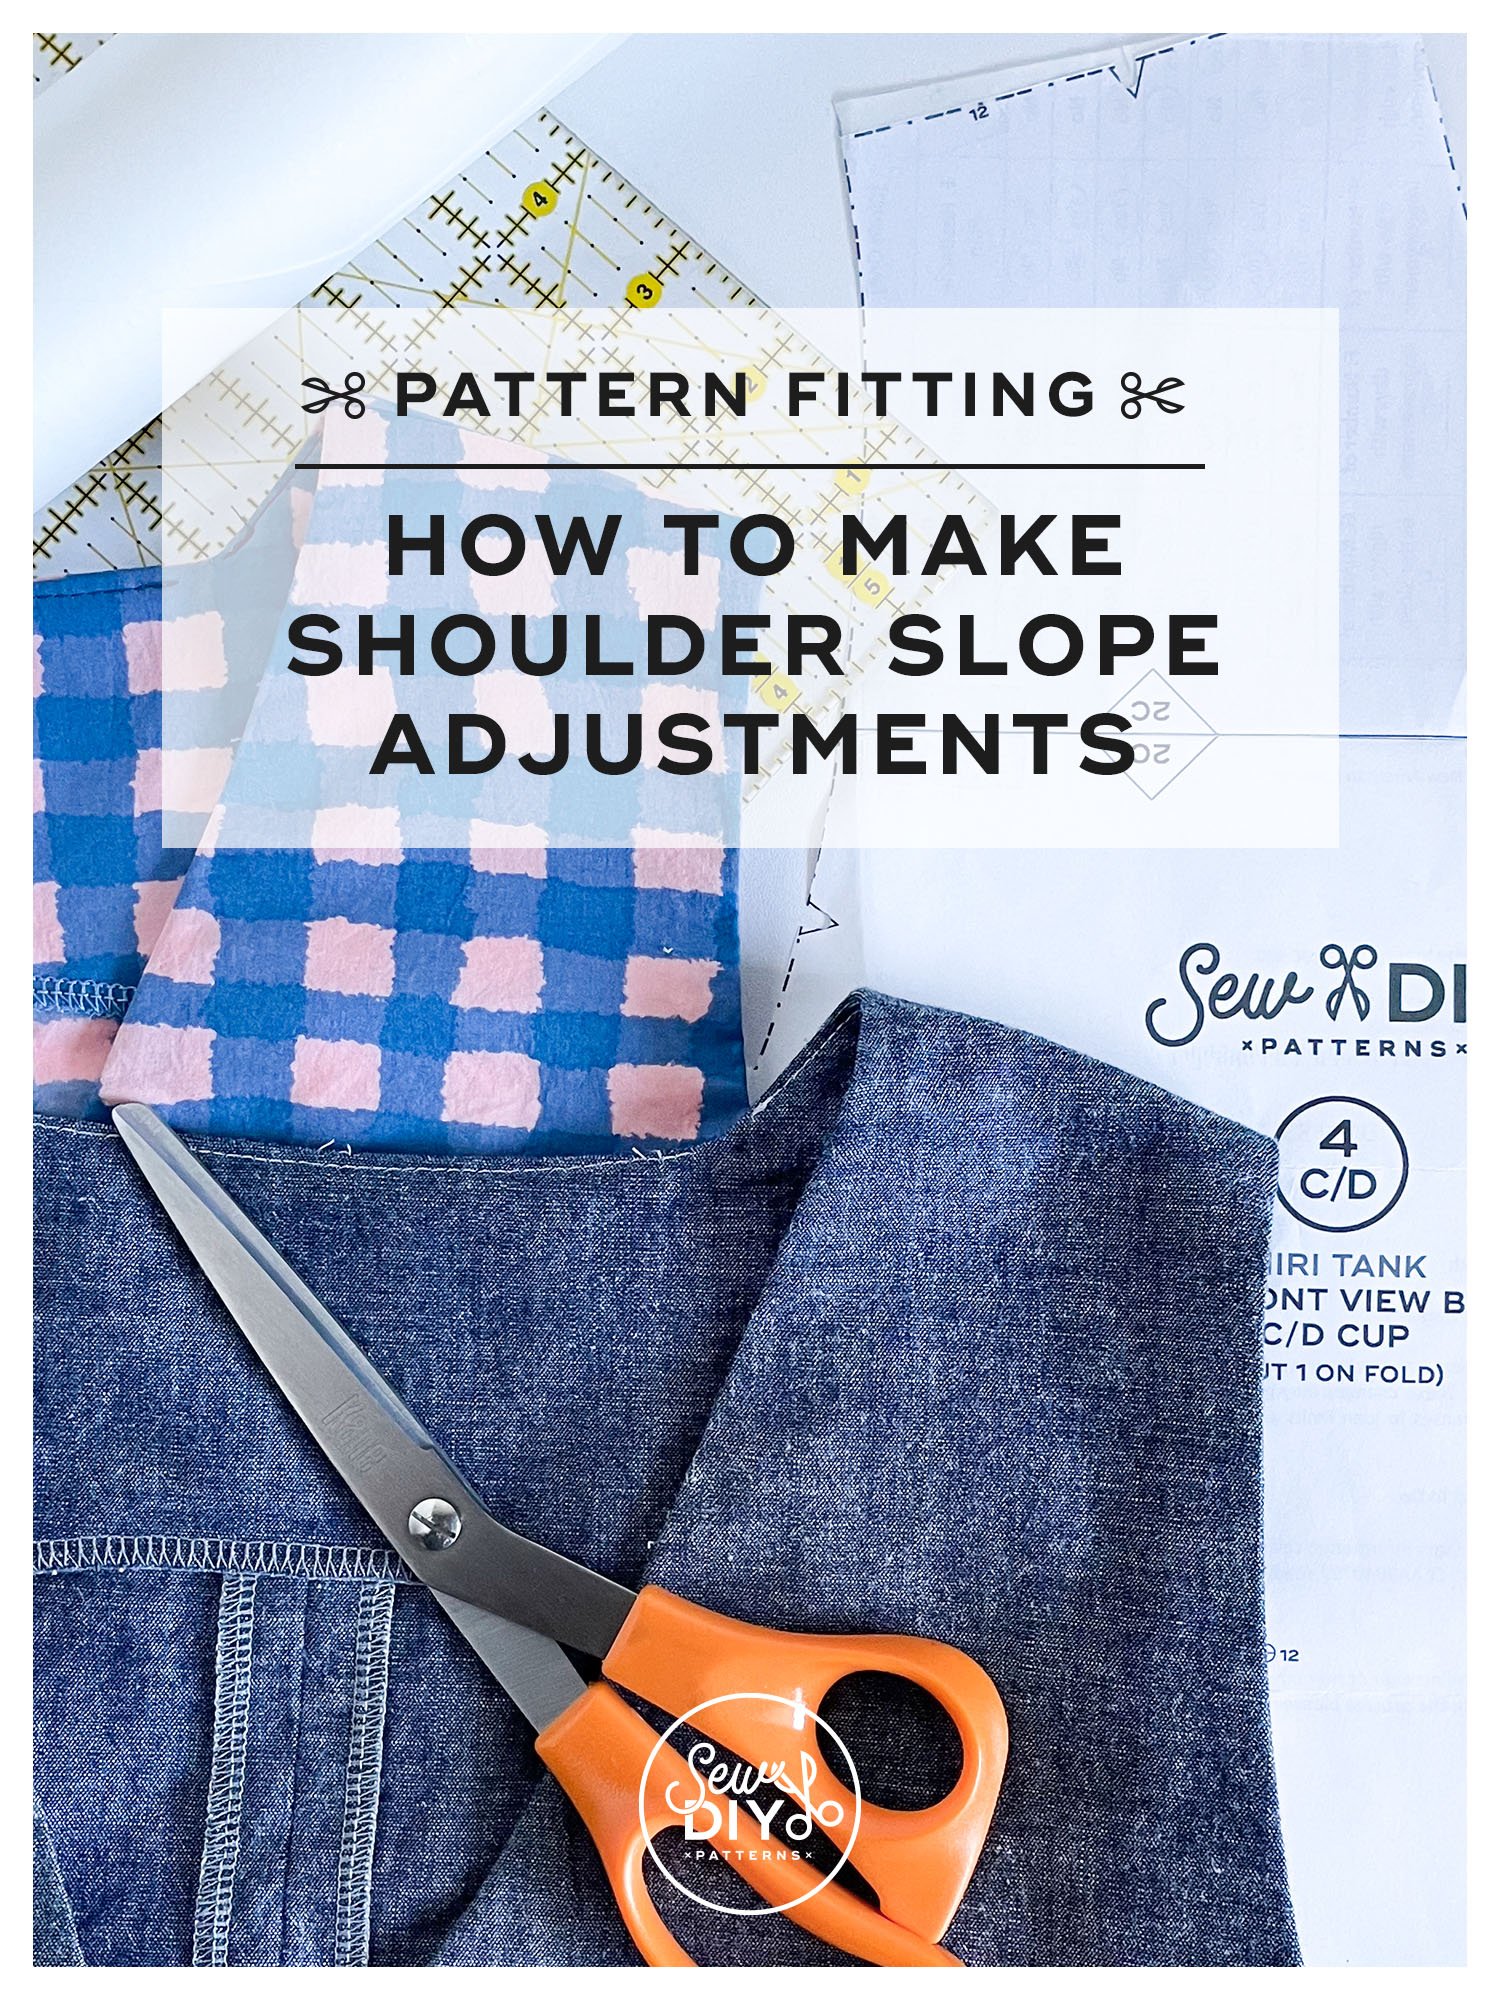 Pattern Fitting: How to Adjust the Shoulder Slope of a Pattern—Video Tutorial